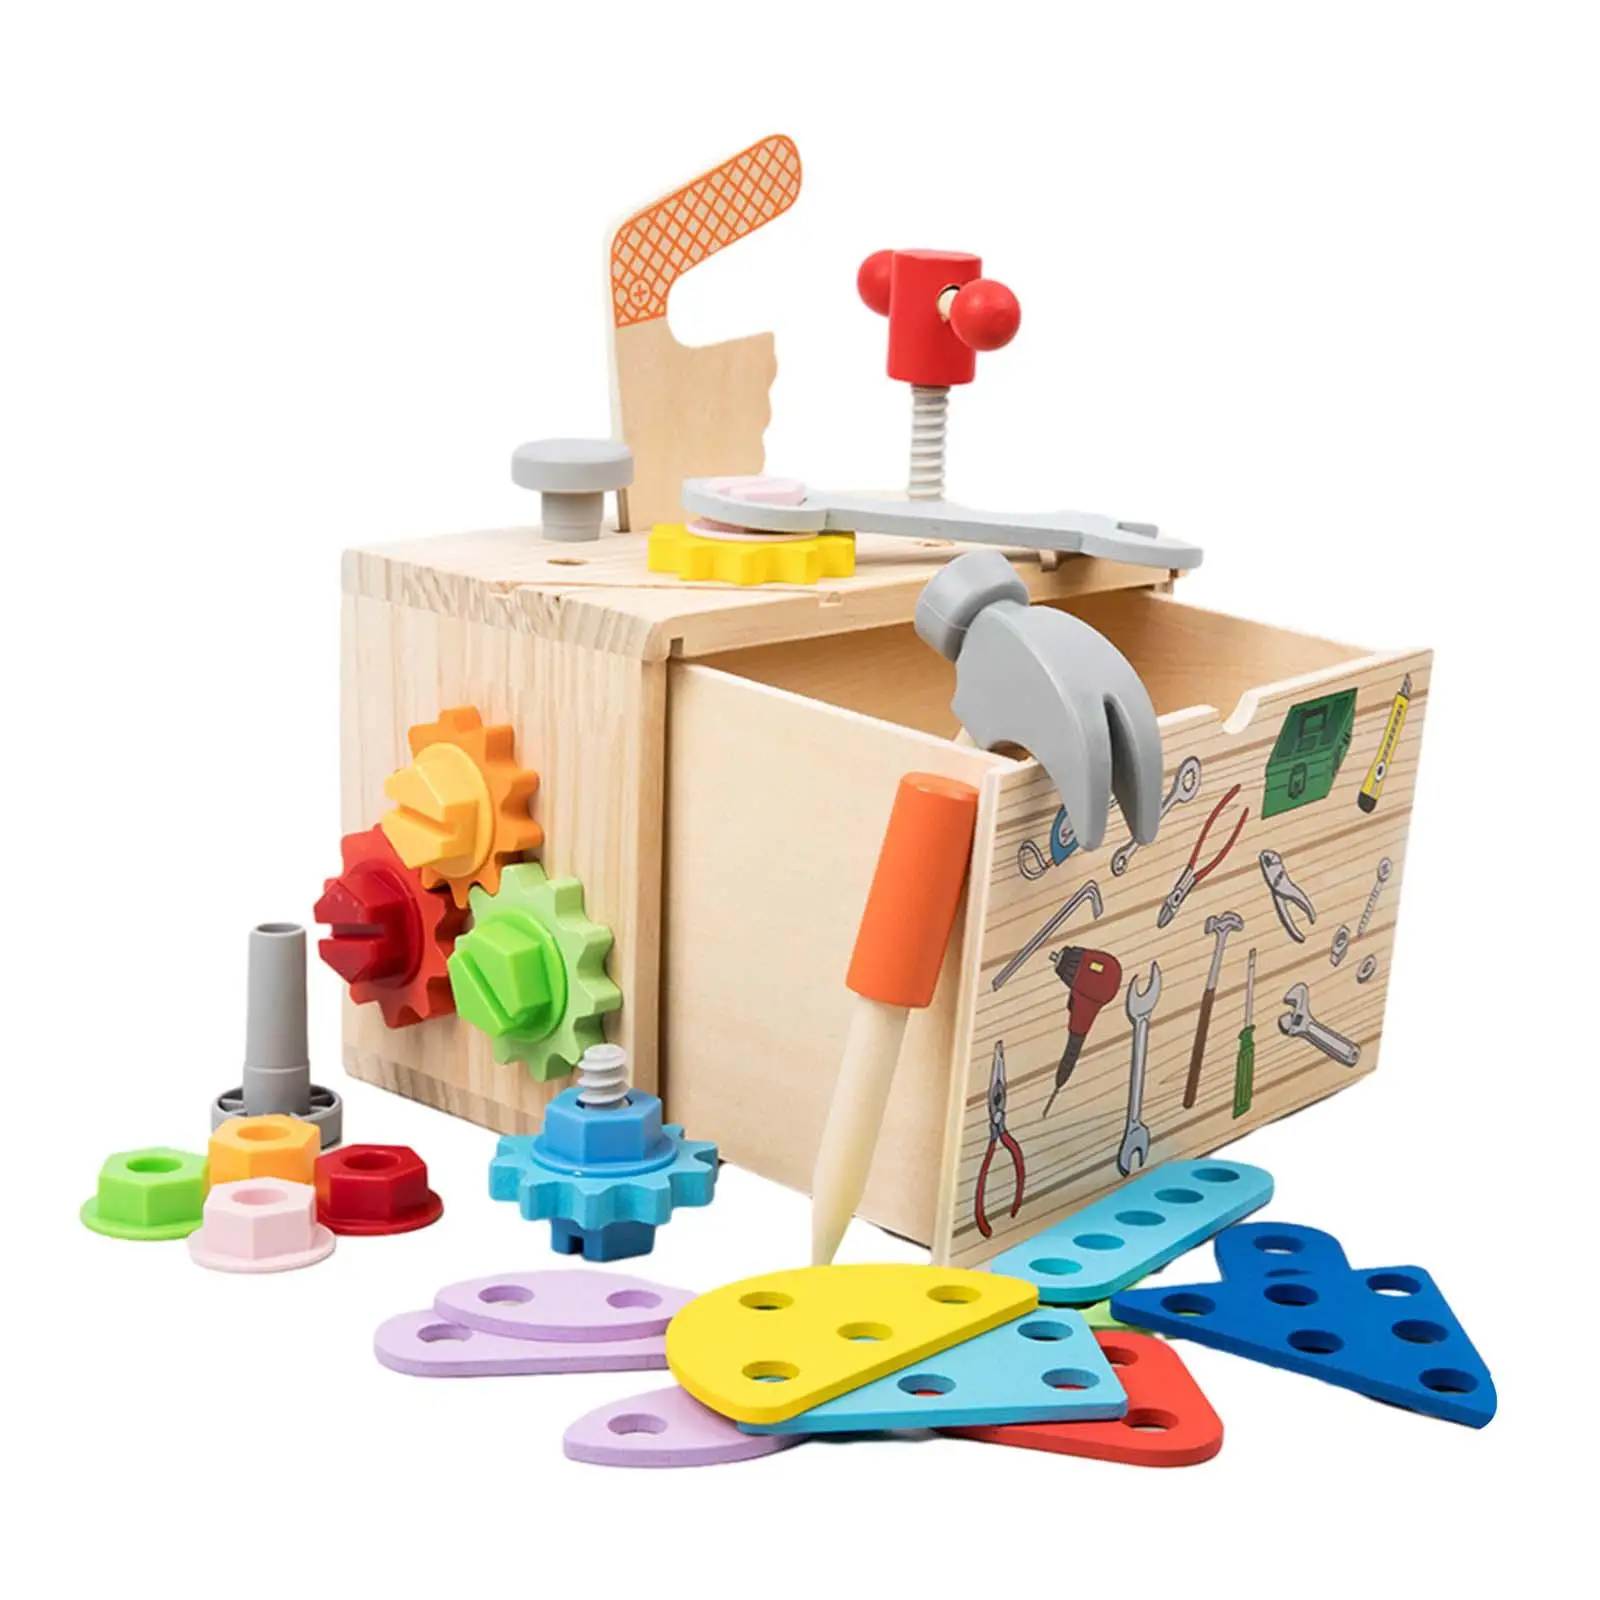 Wooden Toolbox Toy Develops Fine Motor Skills DIY Children Repair Play Tool Set for Festivals Christmas Holiday Ages 3+ Toddlers